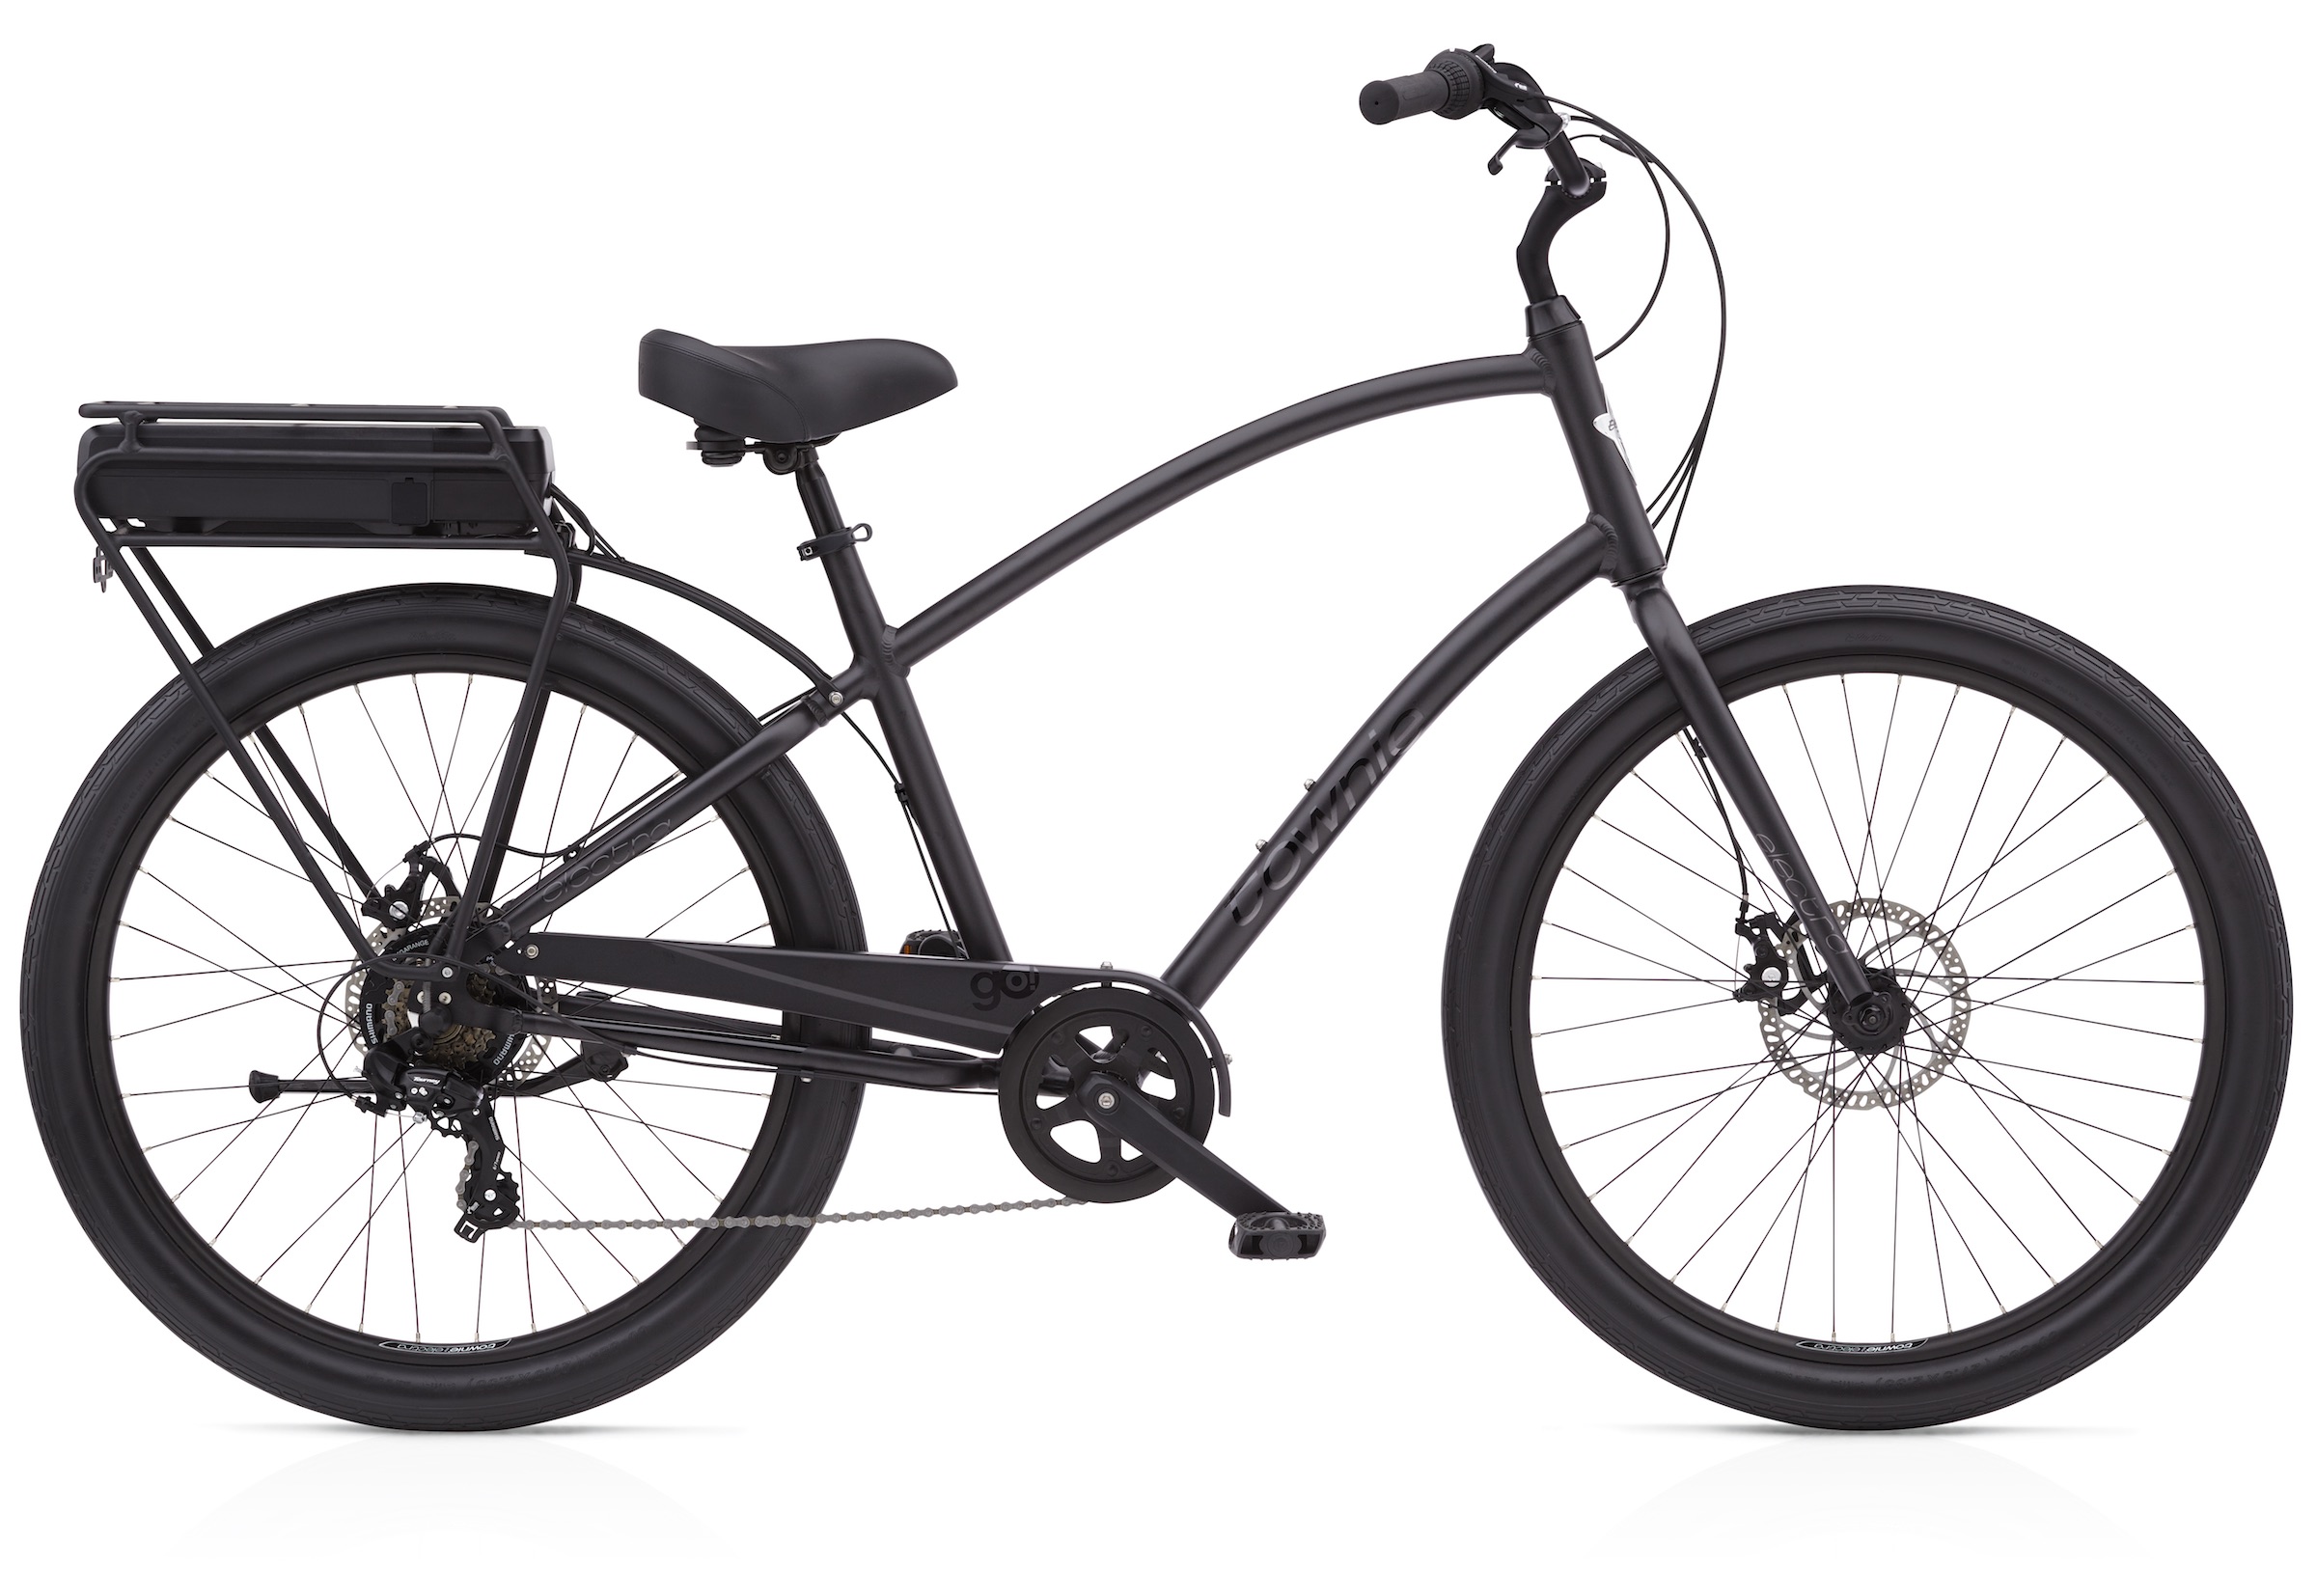 New Electra Townie Go! 7D offers is a 